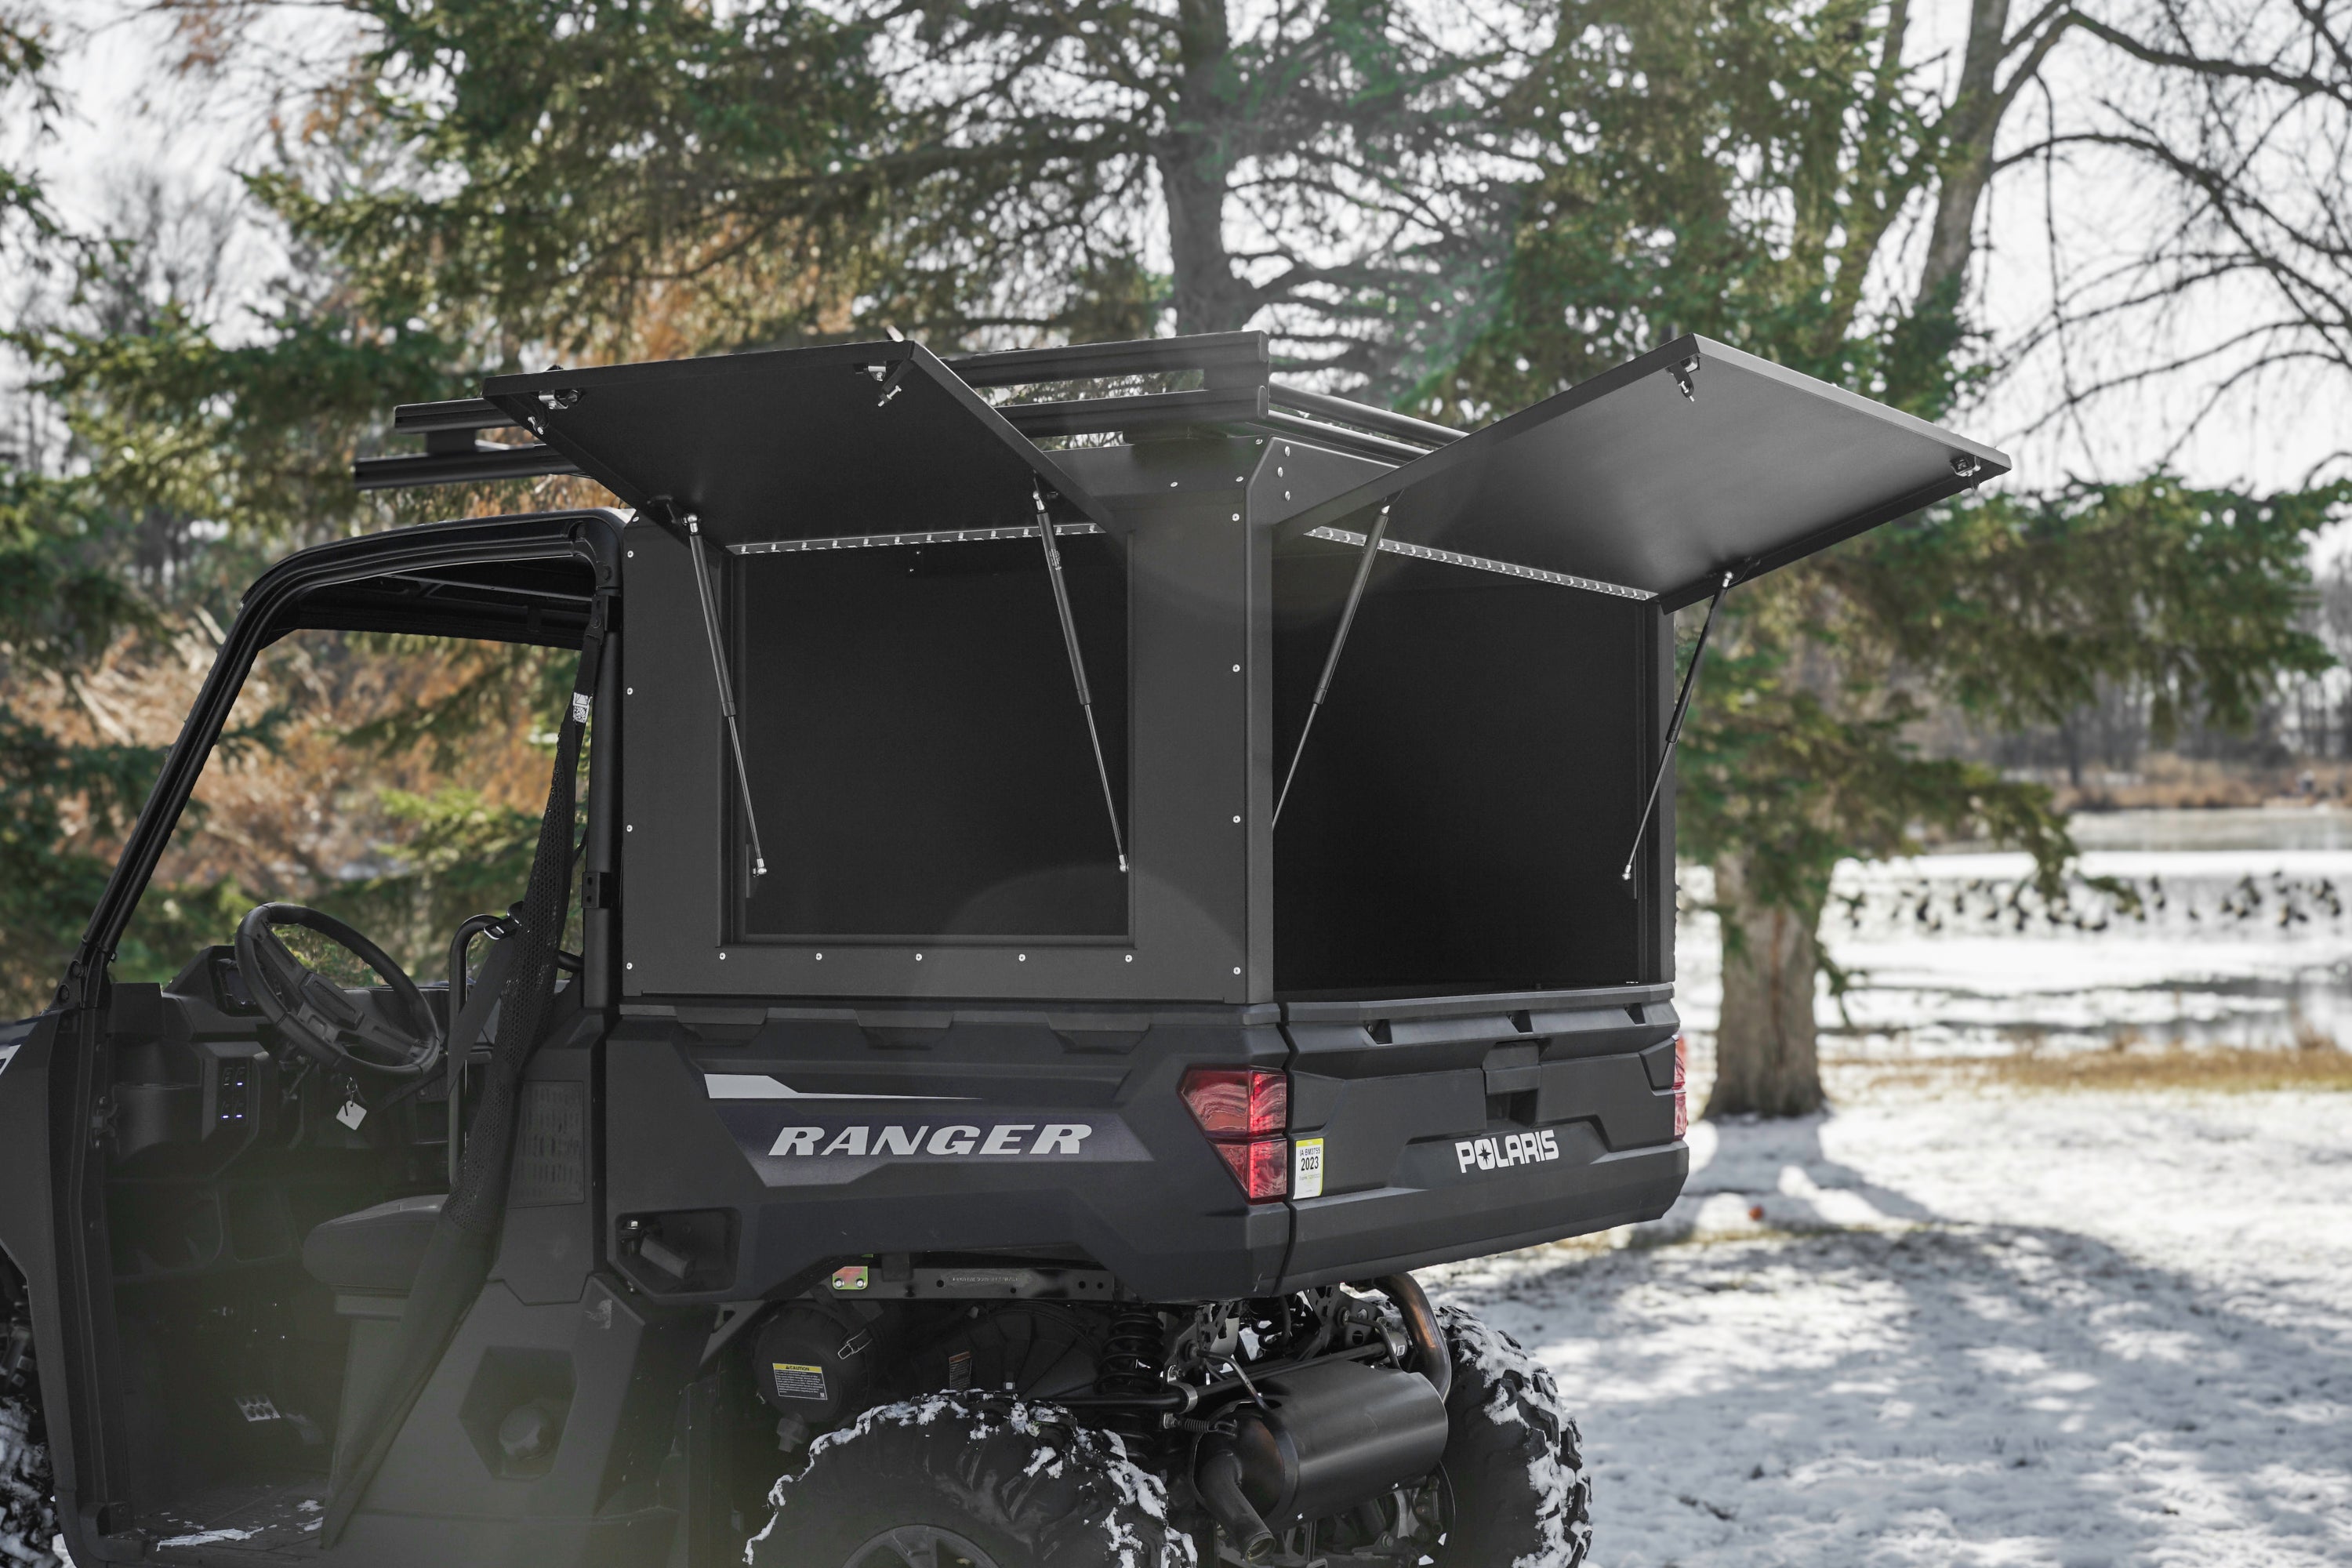 rebel box and rebel roof rack shown installed on a utv with doors open